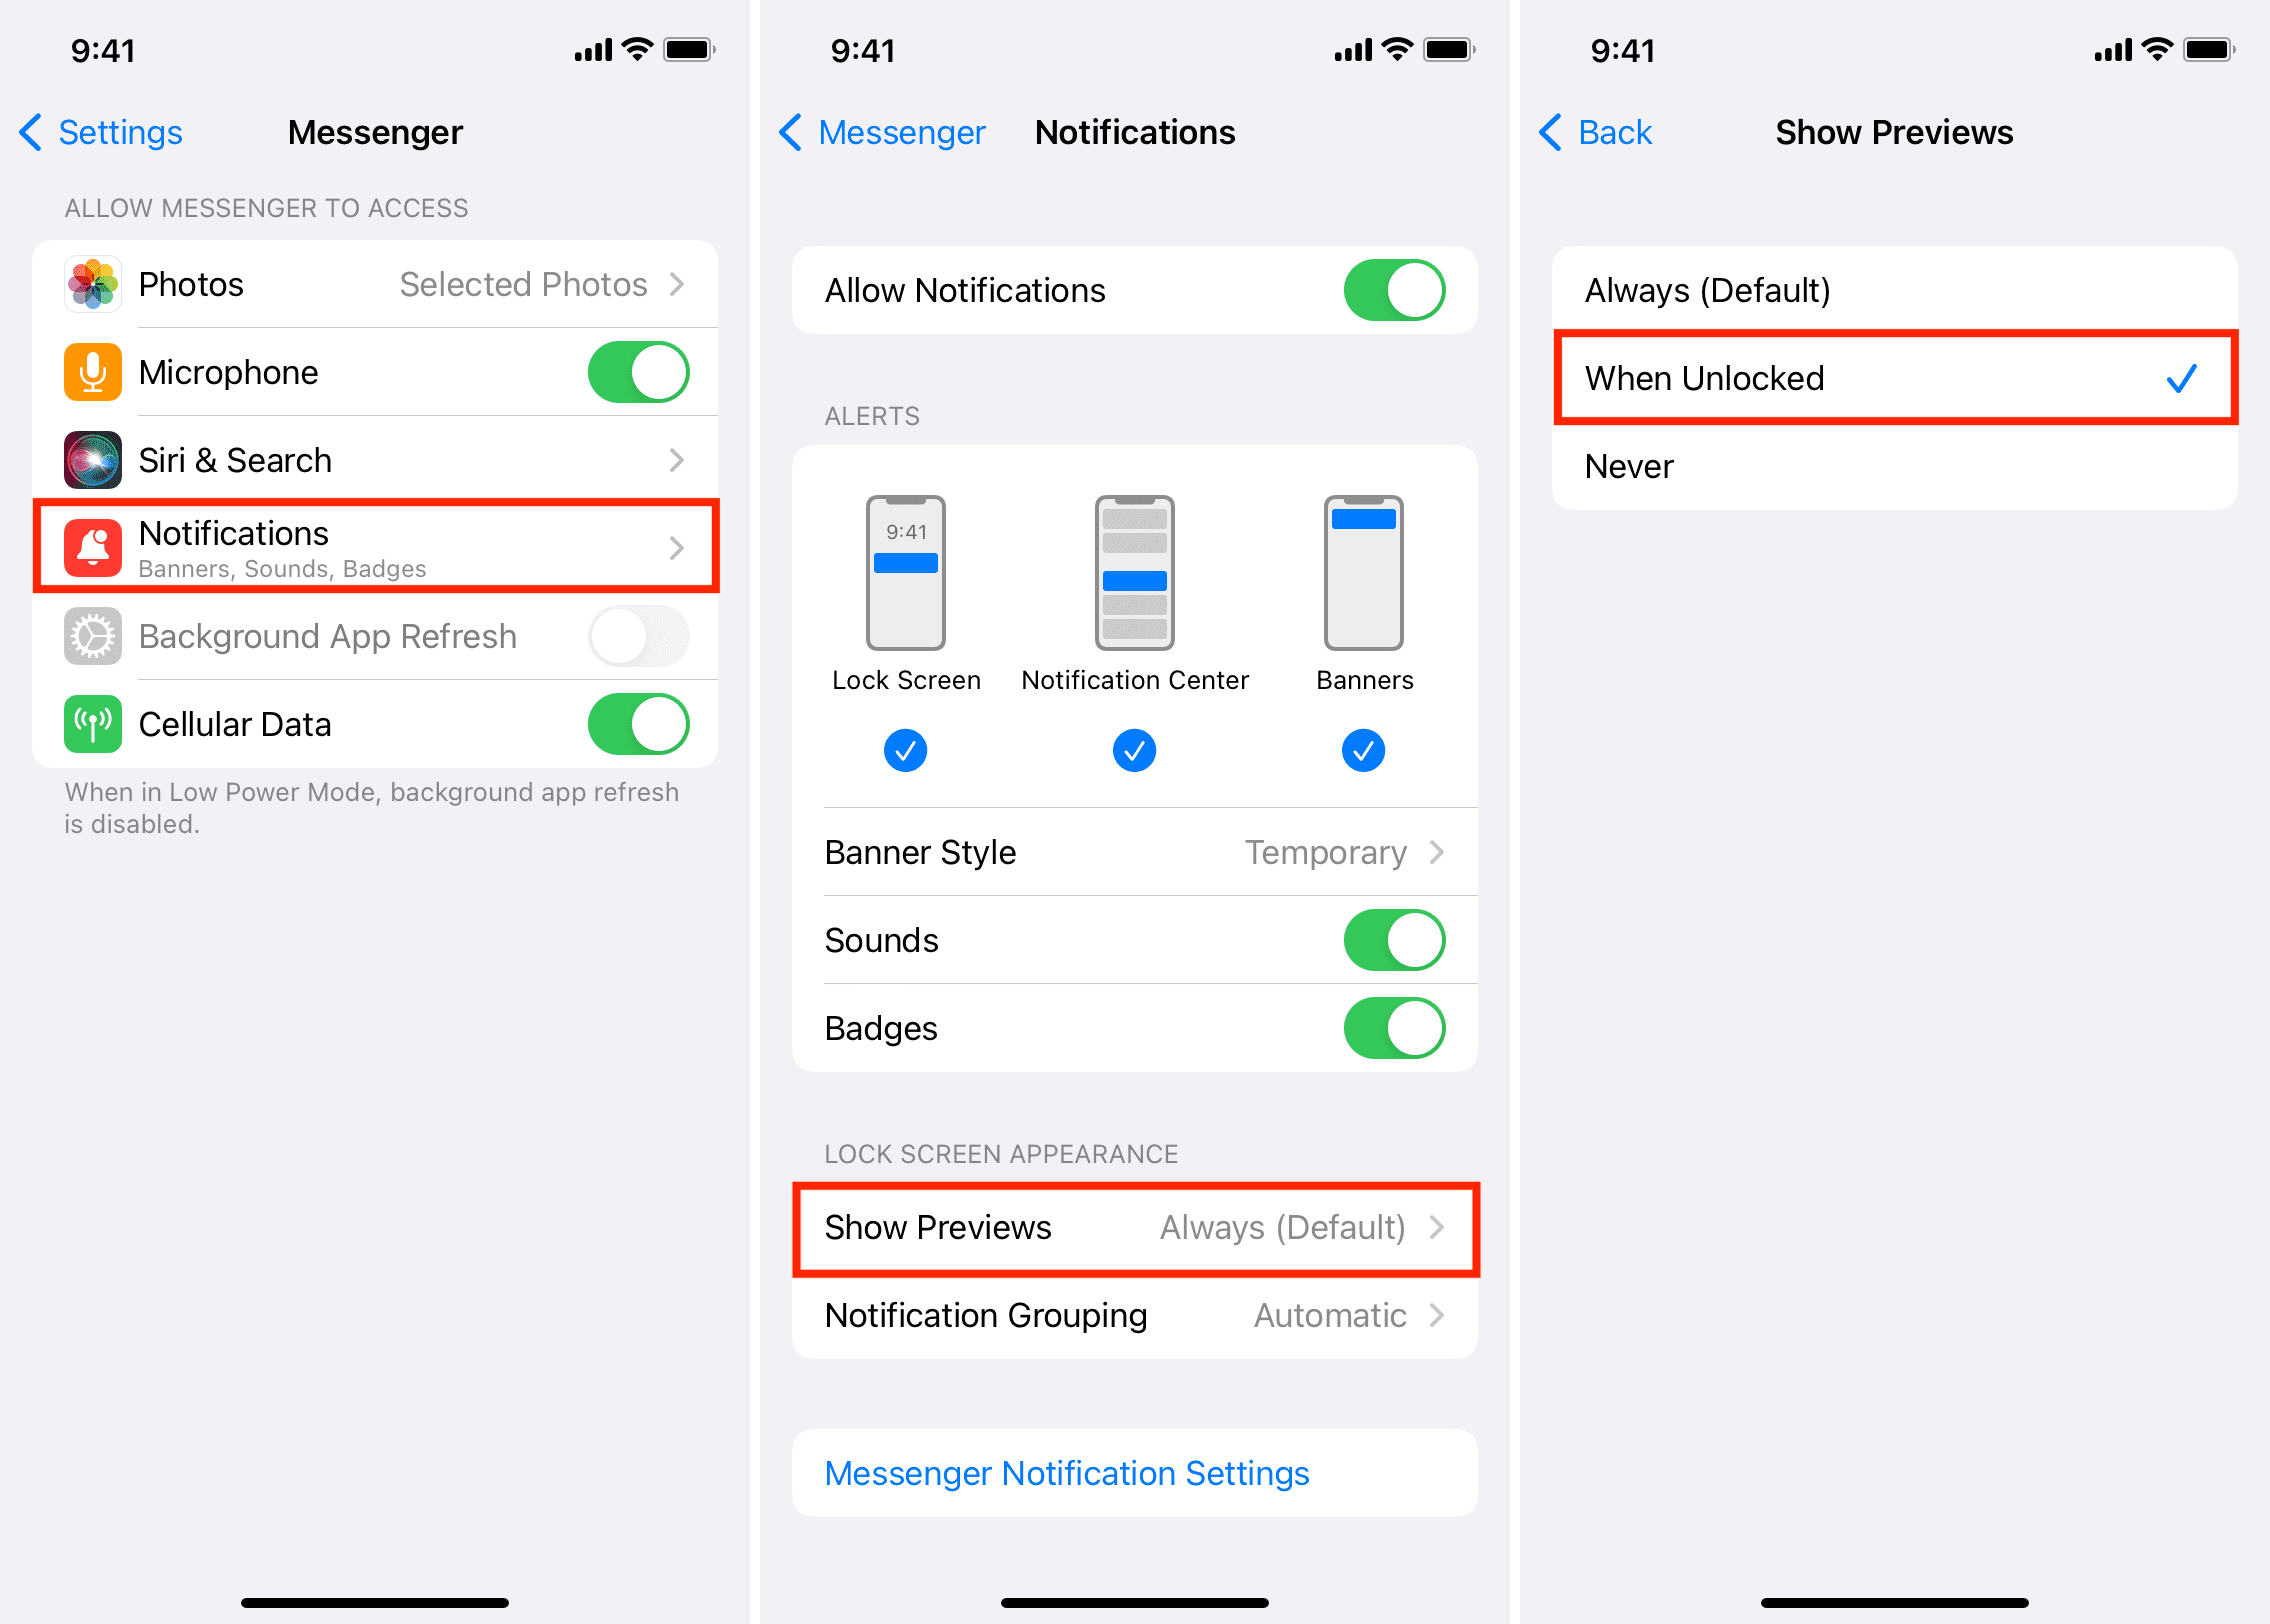 Turn off Show Previews for Messenger on iPhone